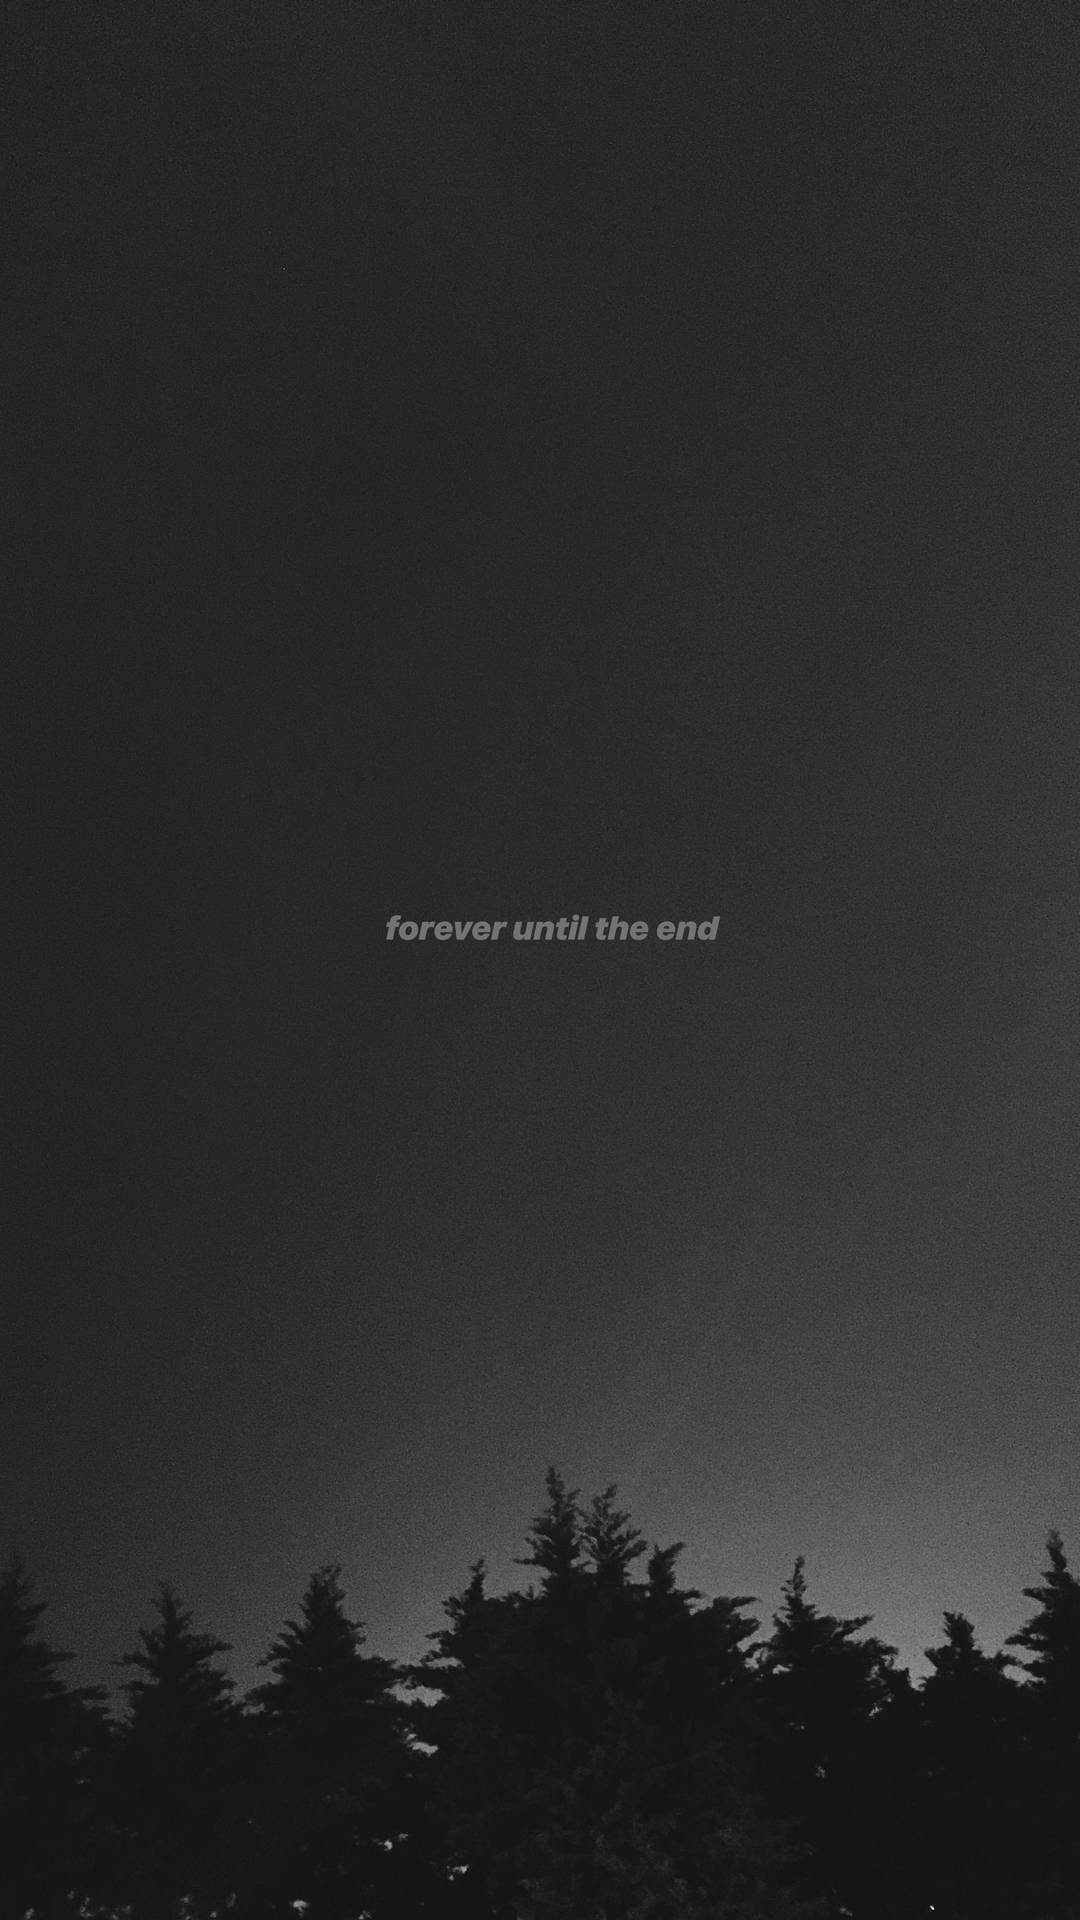 A Black And White Photo Of Trees And The Words Forever Will Be The Sound Wallpaper